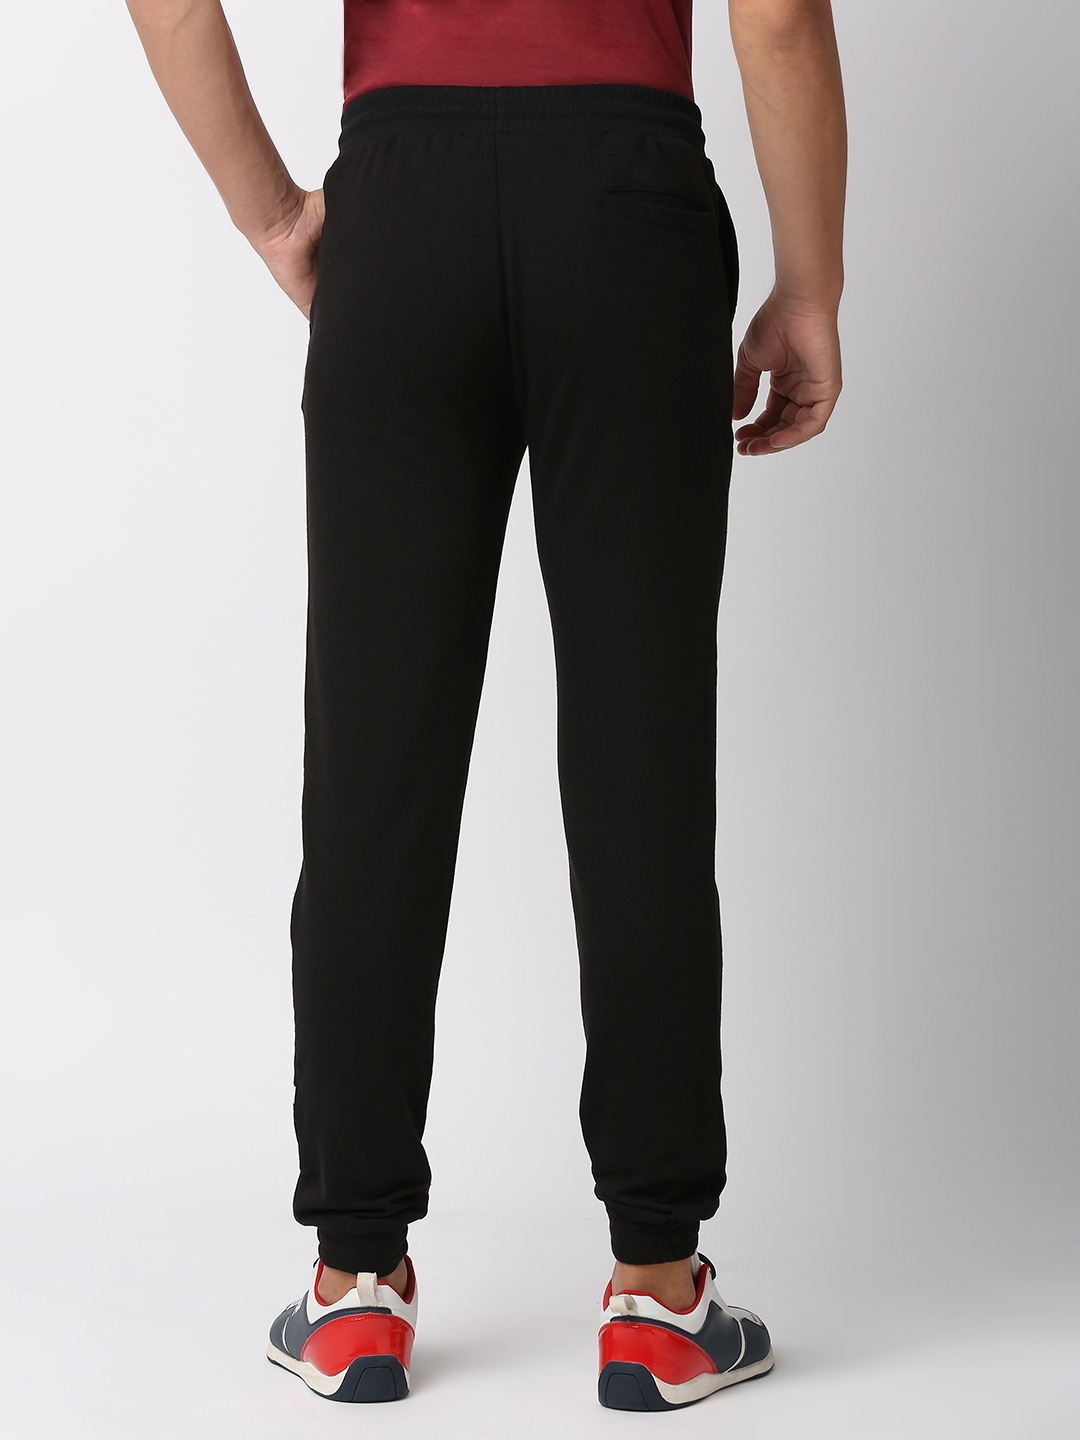 Fitz French Terry Solid Slim Fit Joggers Trackpants - Jet Black